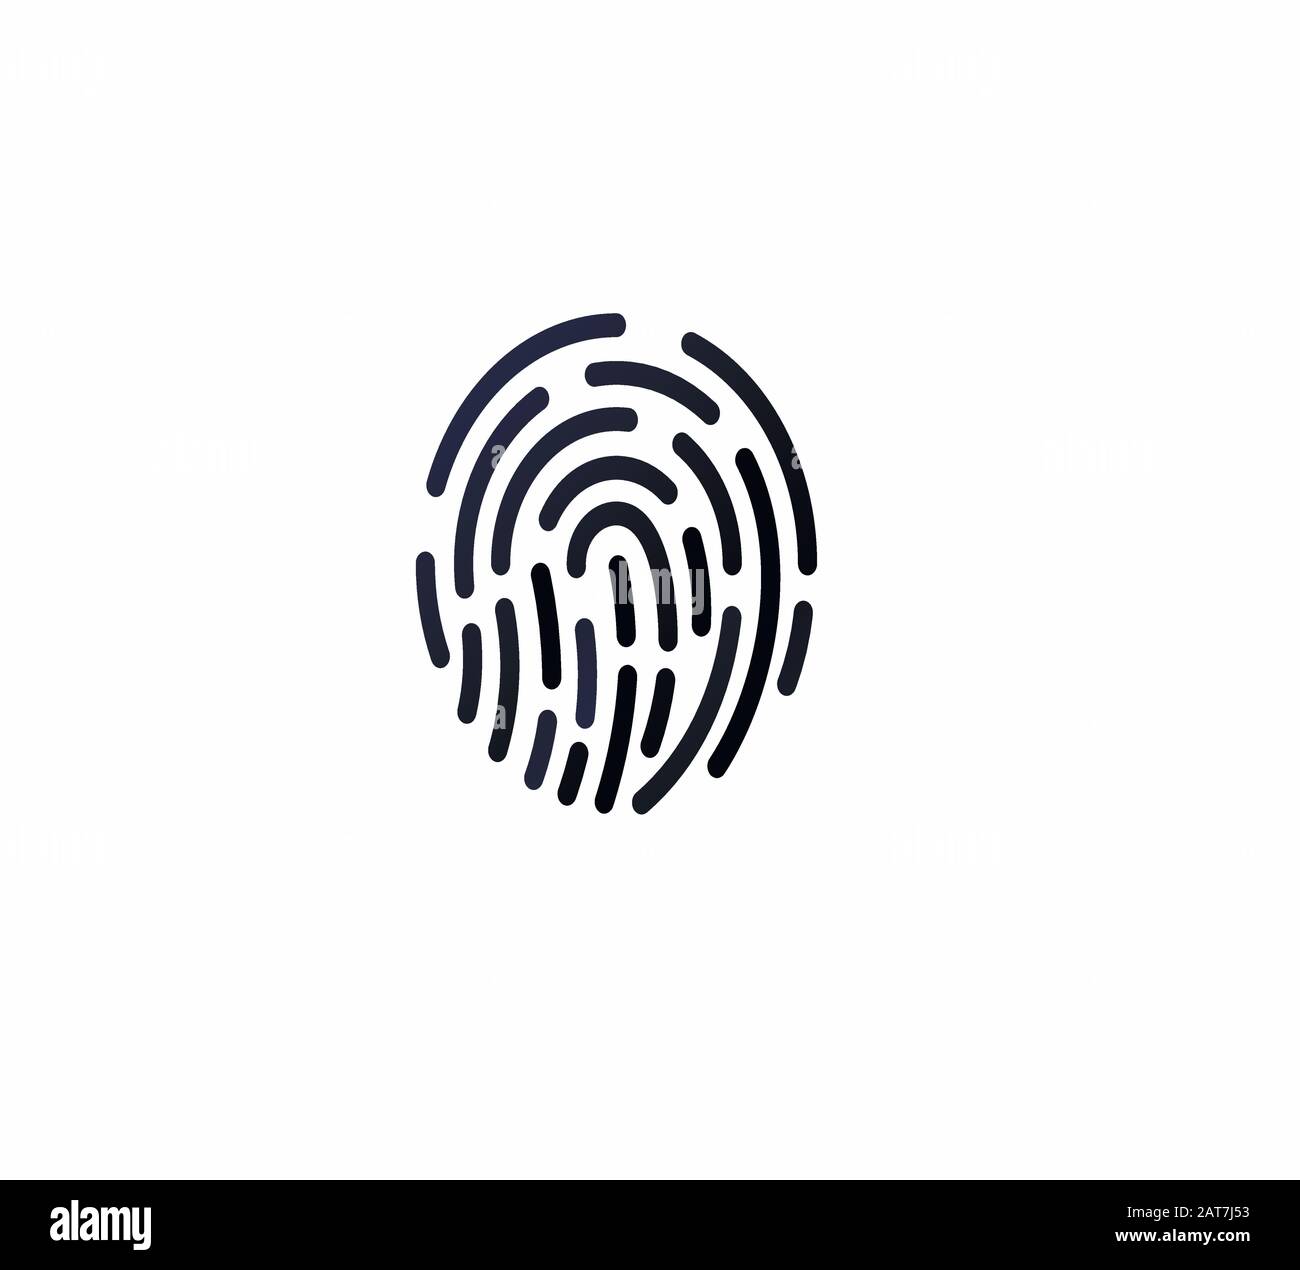 Fingerprint icon close-up isolated - security and unlock Stock Vector